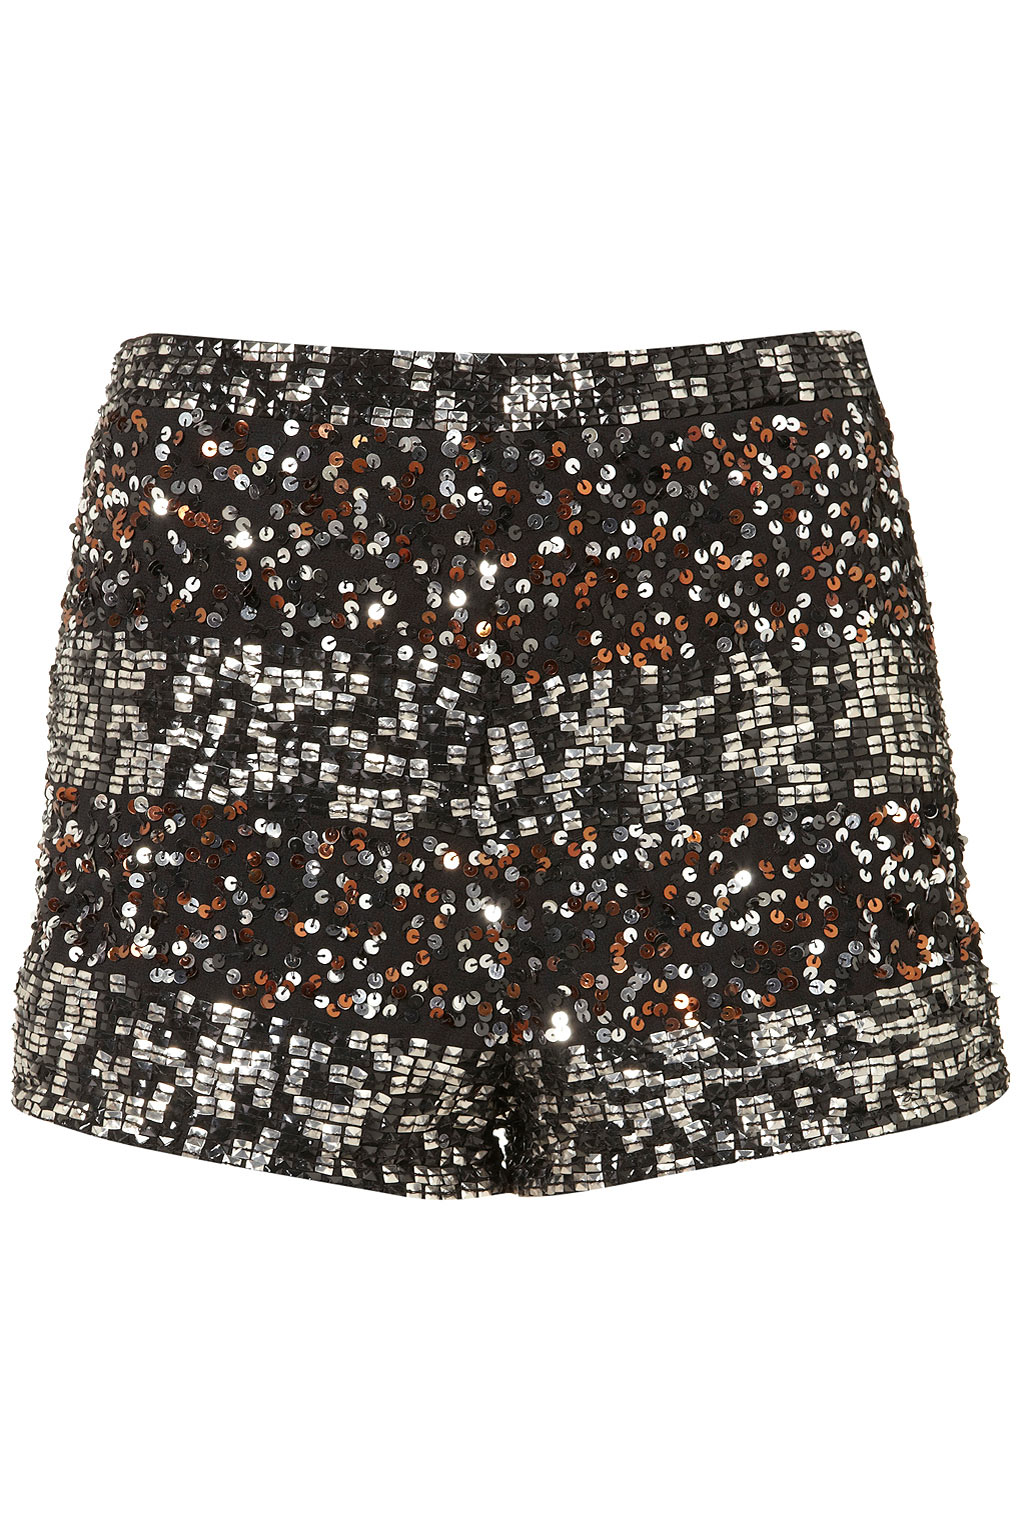 Today's Obsession: Sparkly Shorts - Lunch Or Louboutins